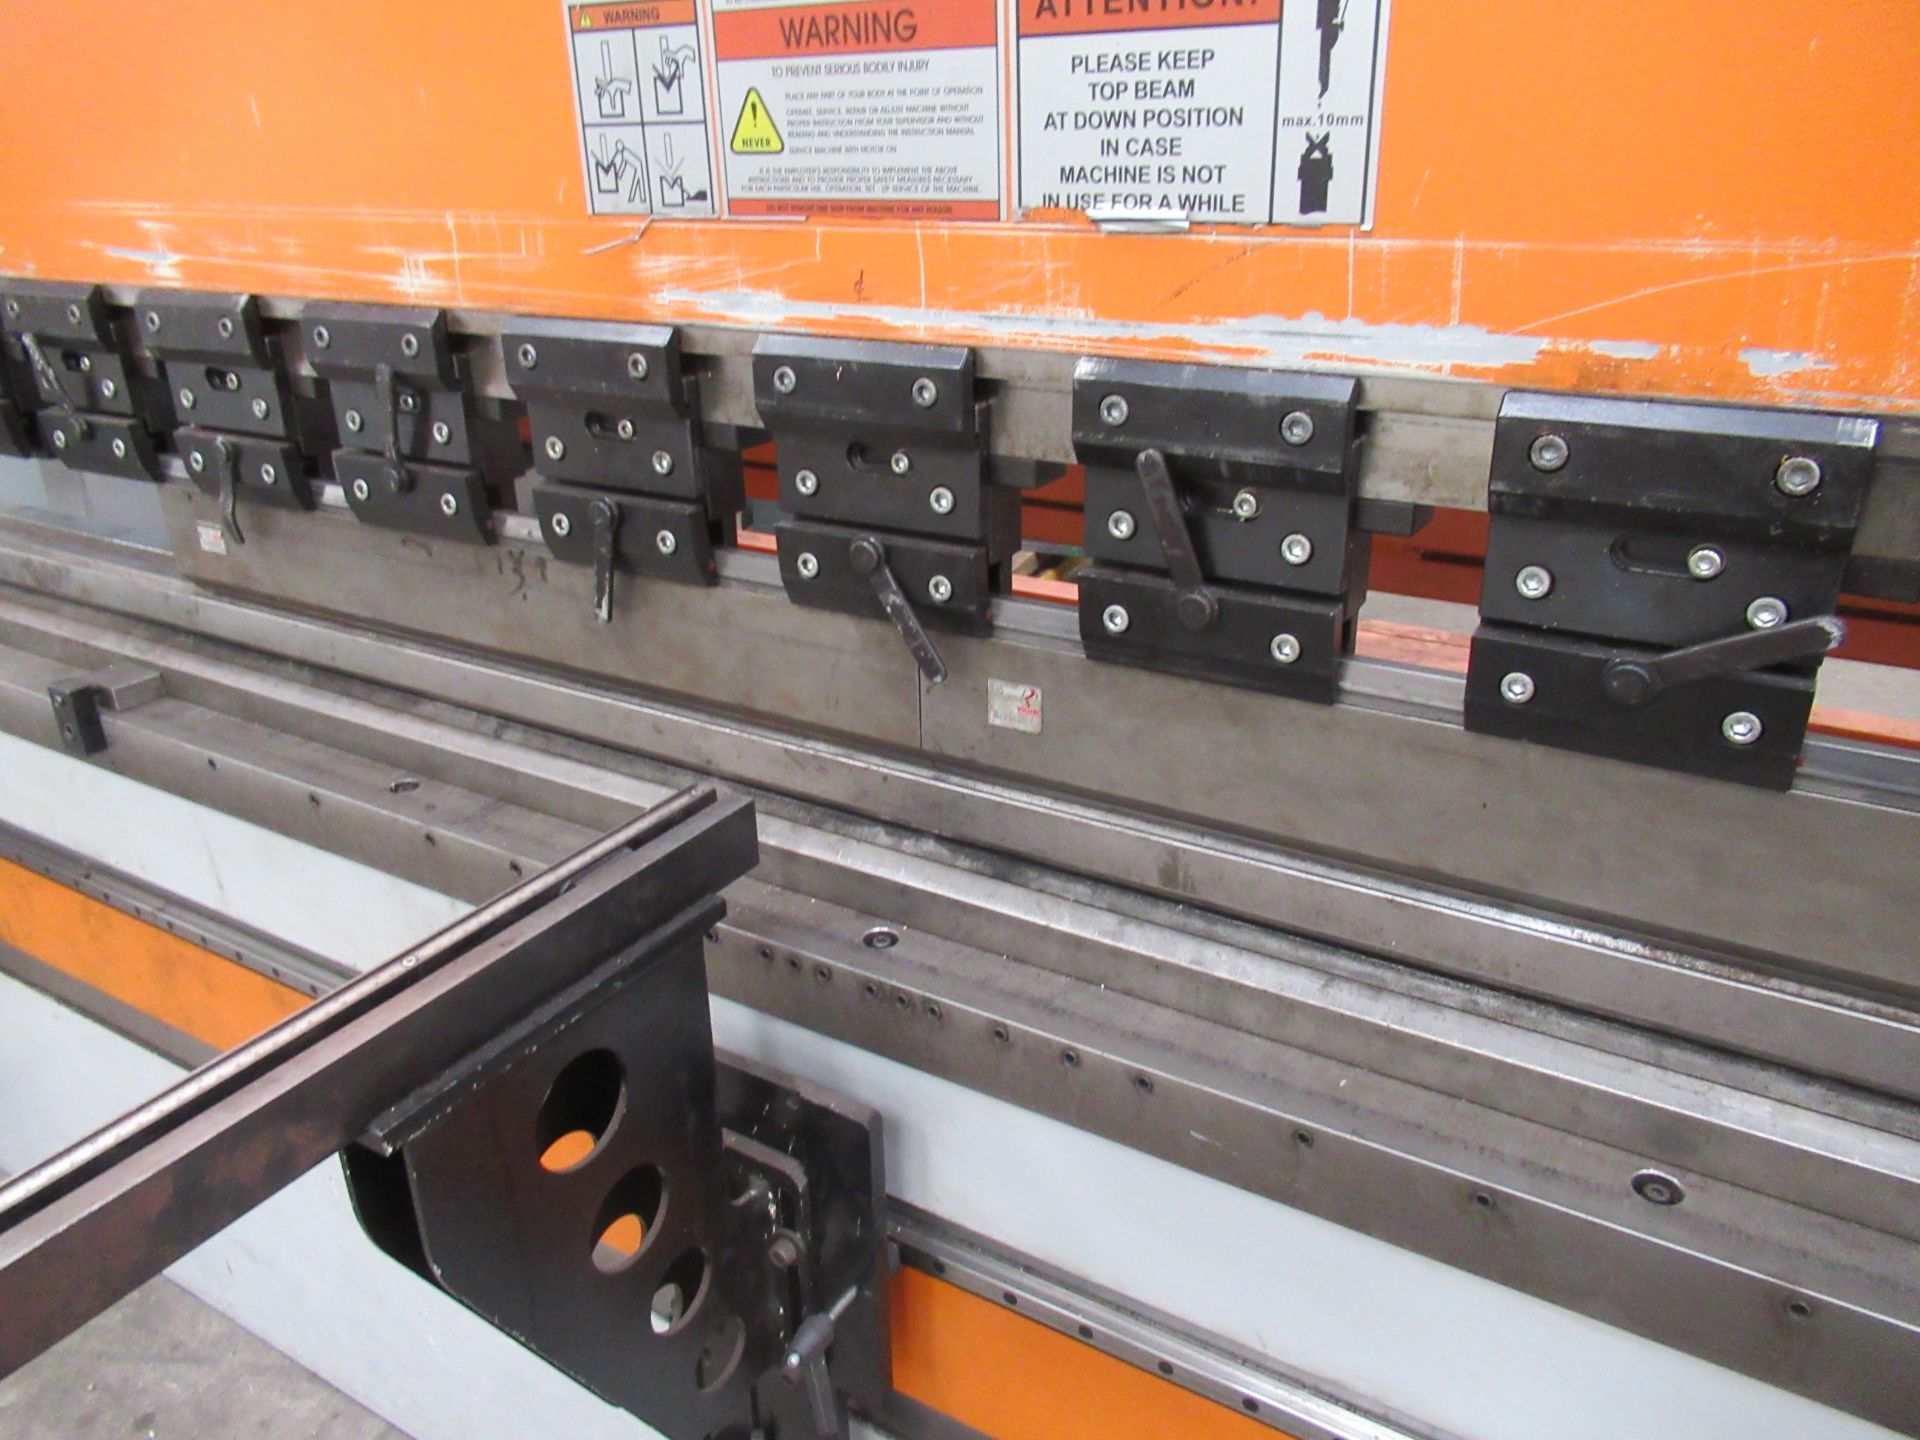 Ermaksan Speed-bend Pro 4100 x 220 CNC Hydraulic Press Brake and a selection of tooling for press br - Image 10 of 16